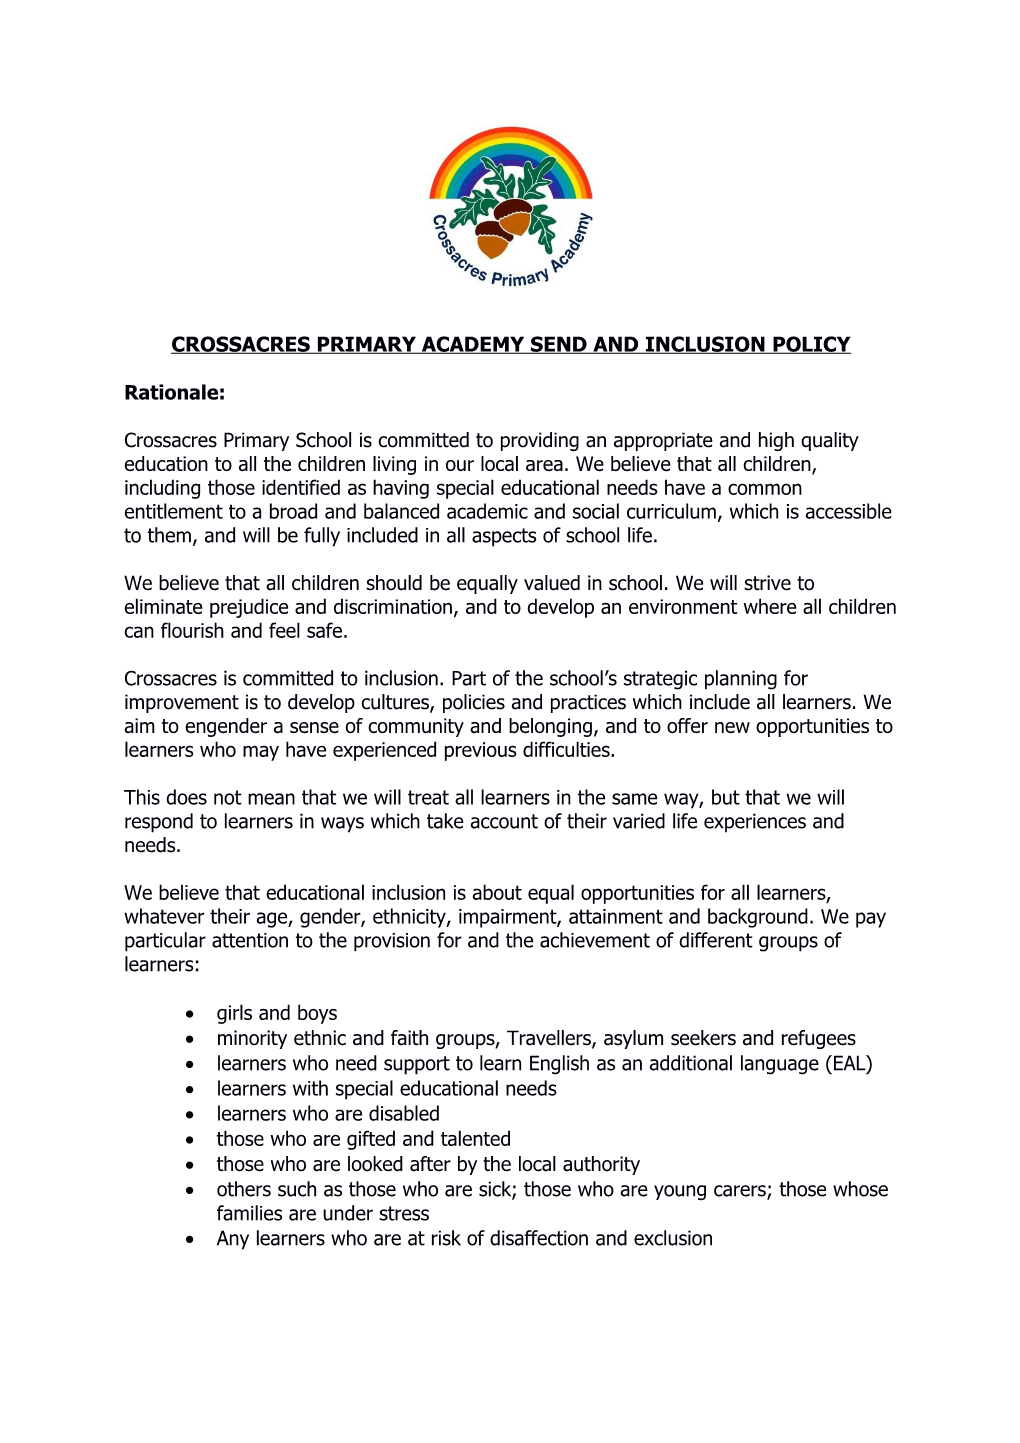 Crossacres Primary Academy Send and Inclusion Policy